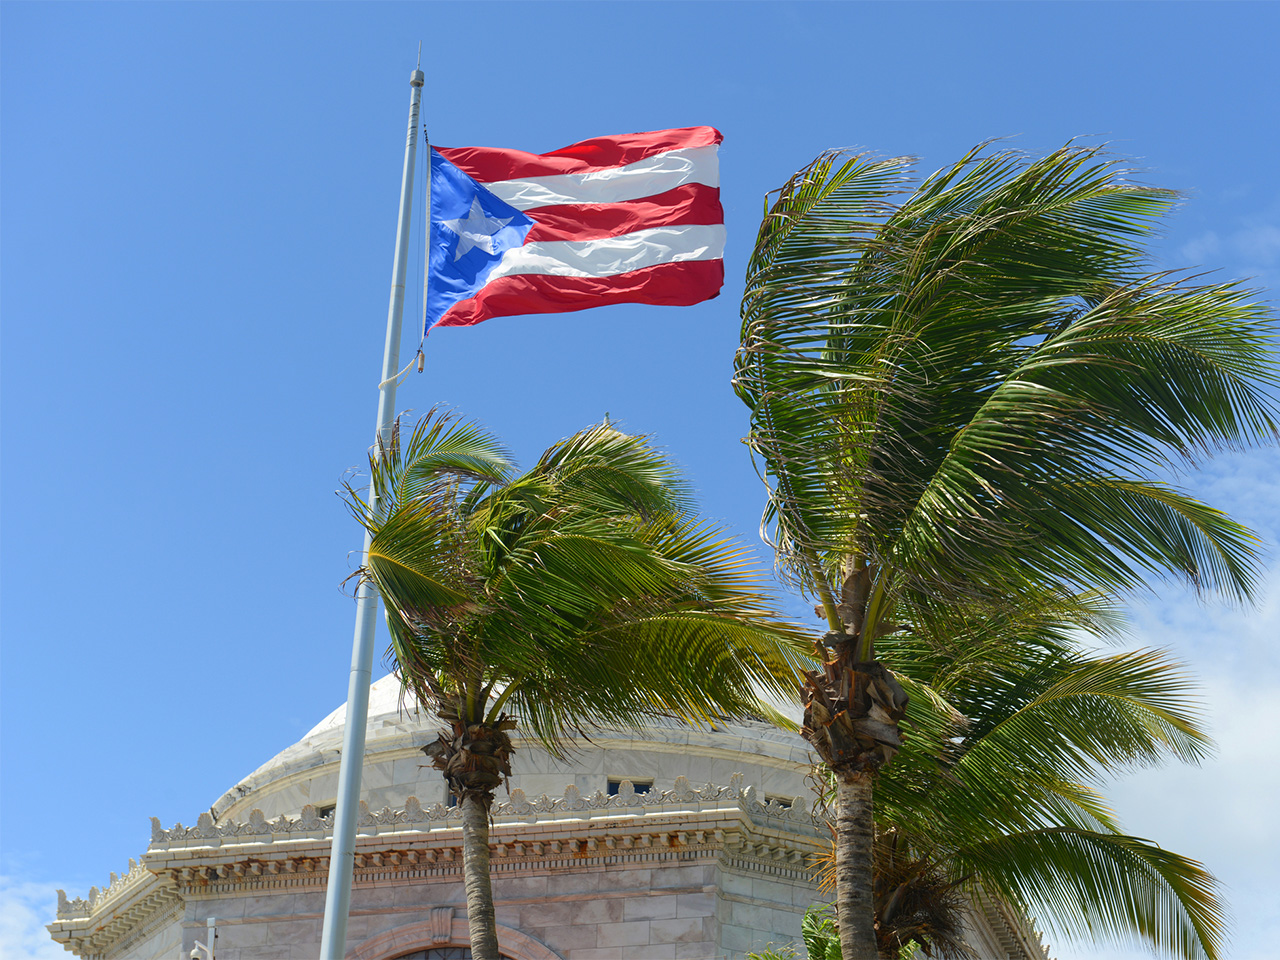 The Puerto Rico flag flies over the capitol in San Juan.